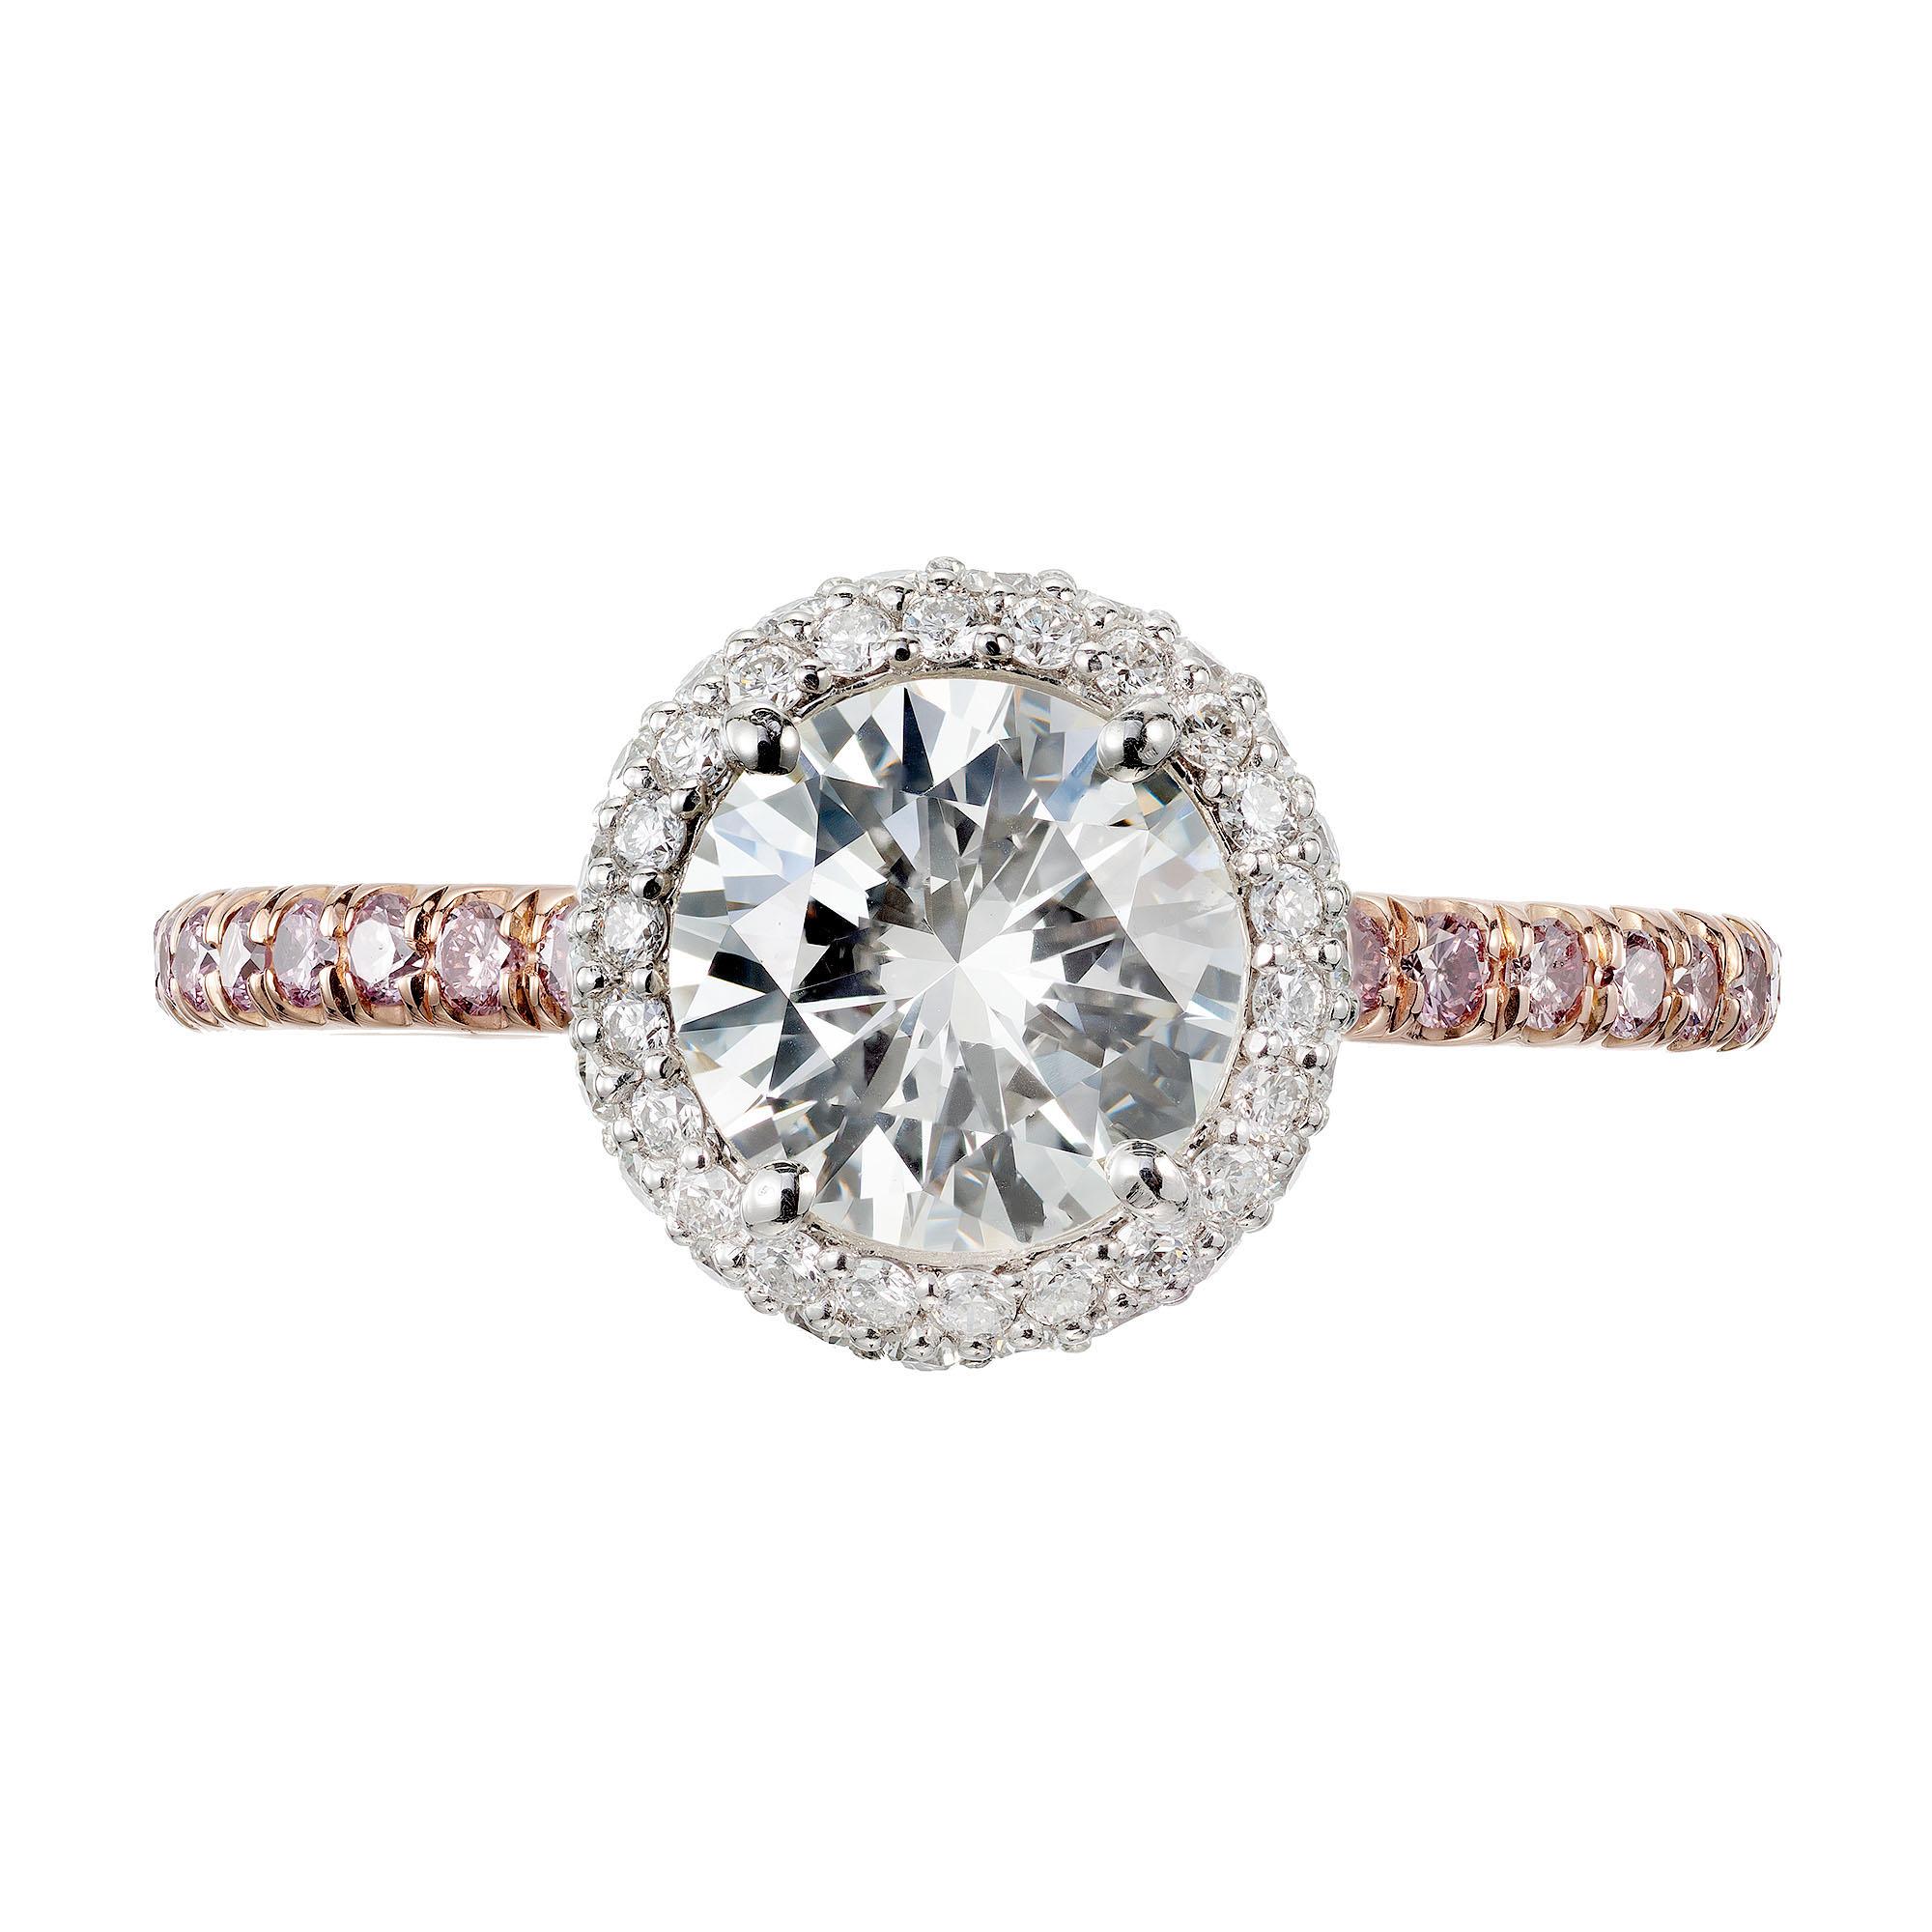 EGL certified diamond engagement ring.  .96cts center stone with a halo of white diamonds in a 18k rose gold setting with pink accent diamonds. Created in the Peter Suchy Workshop. 

1 round brilliant cut diamond J VS2, approx. .96ct EGL Certificate